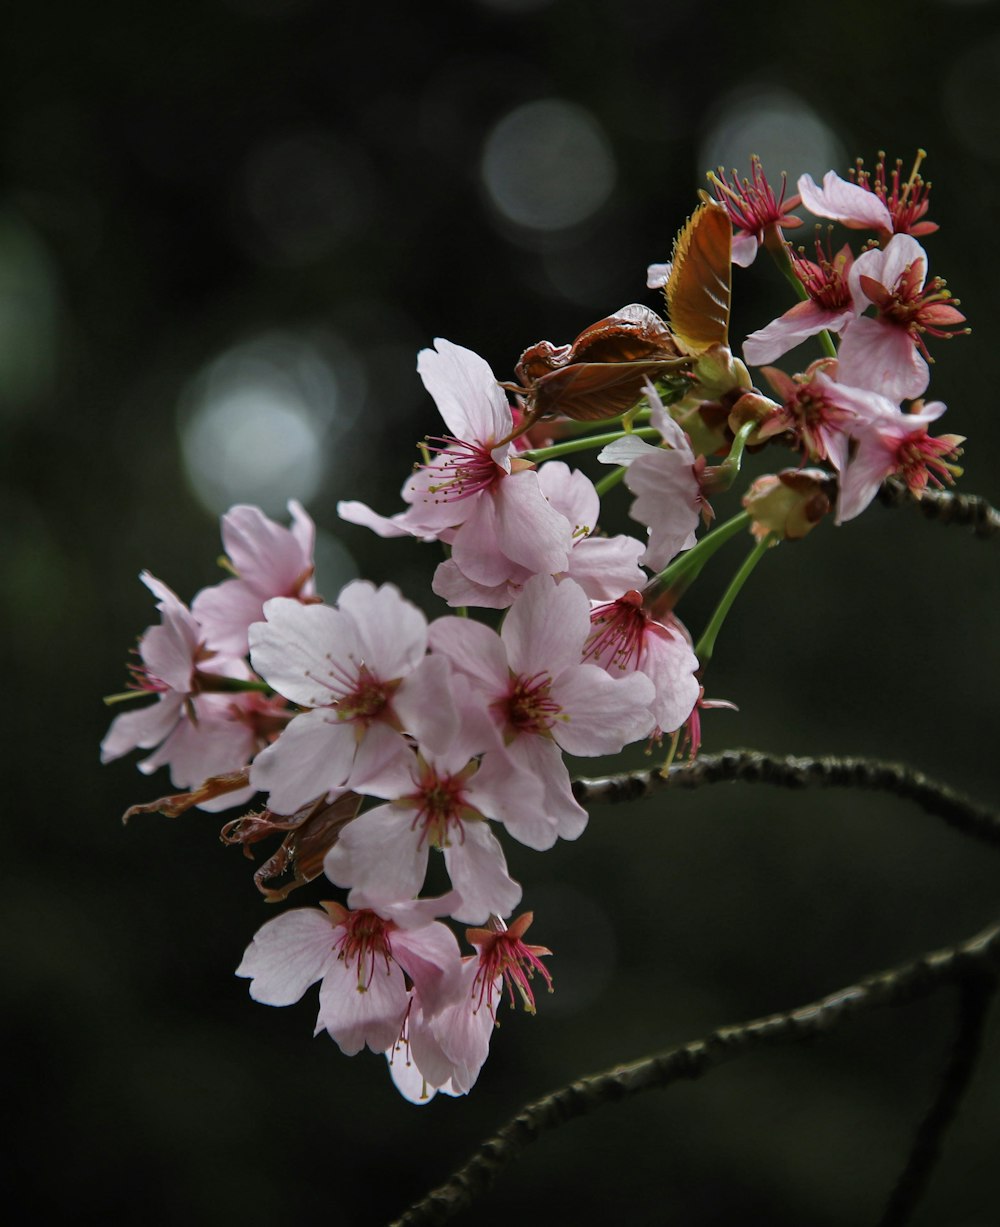 a close up of some pink flowers on a tree